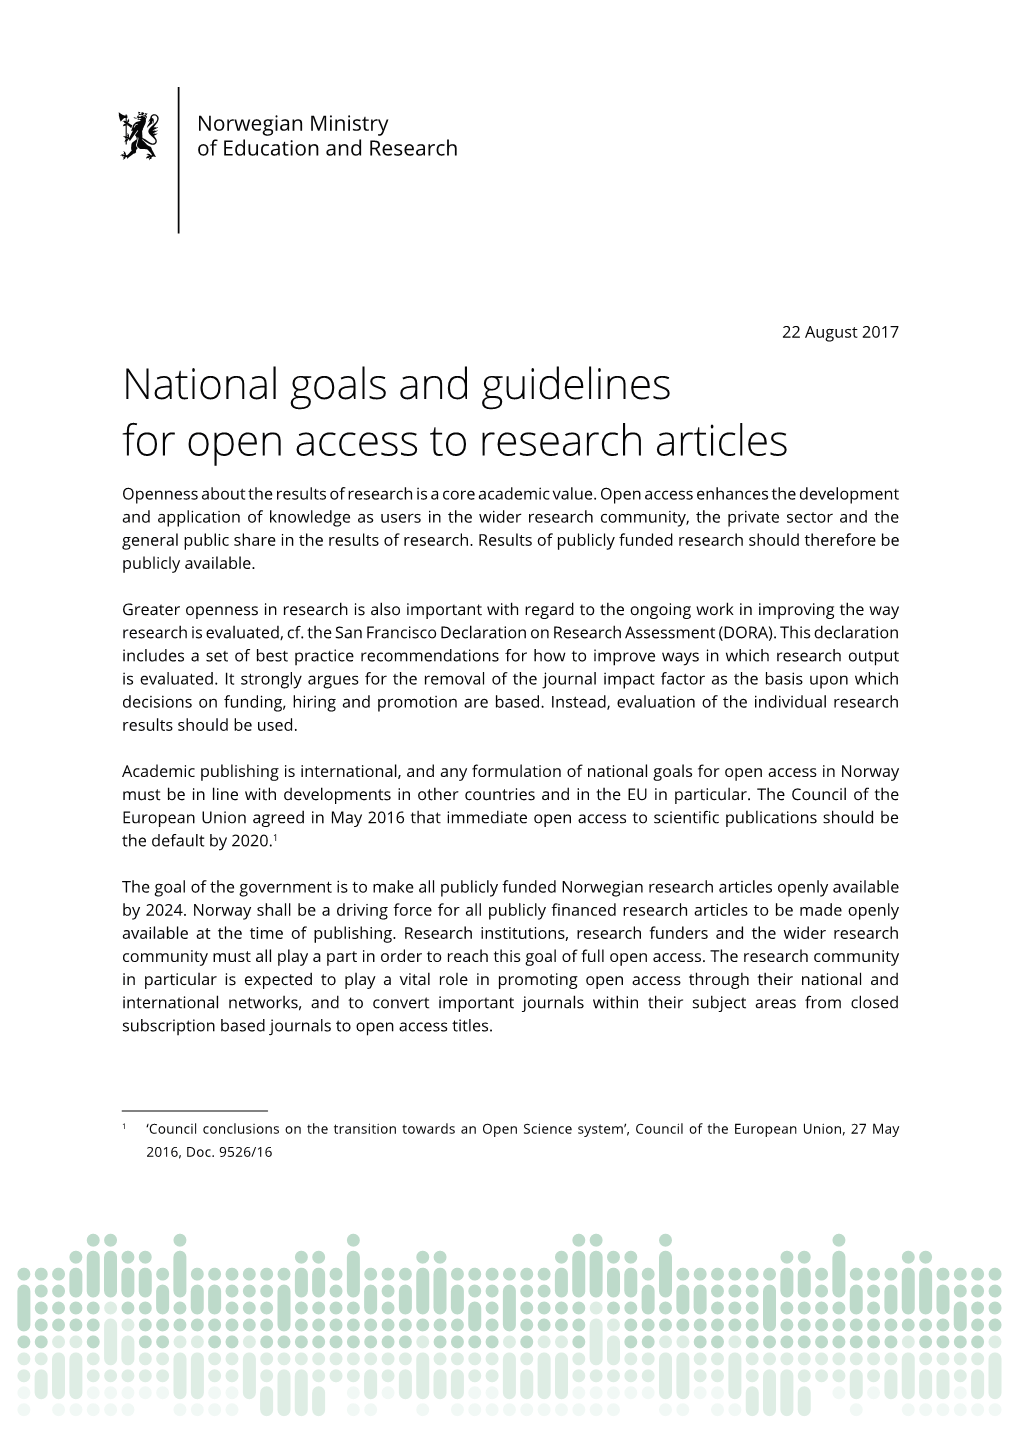 National Goals and Guidelines for Open Access to Research Articles